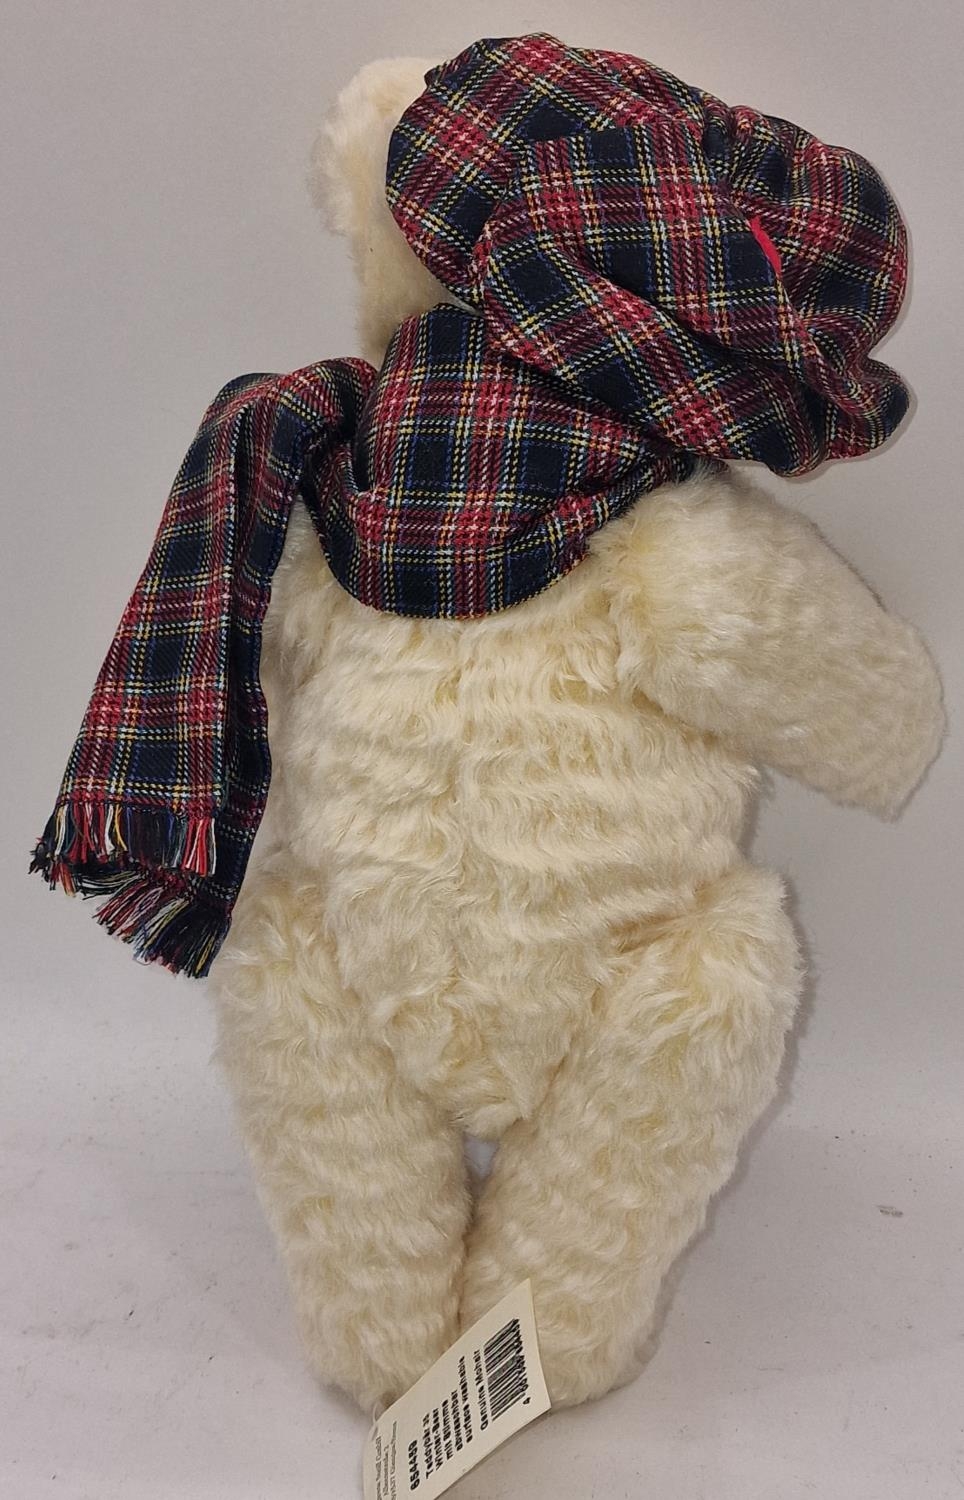 Steiff Danbury Mint "Hamish" collectors teddy bear 34cm complete with certificate in plain cardboard - Image 2 of 3